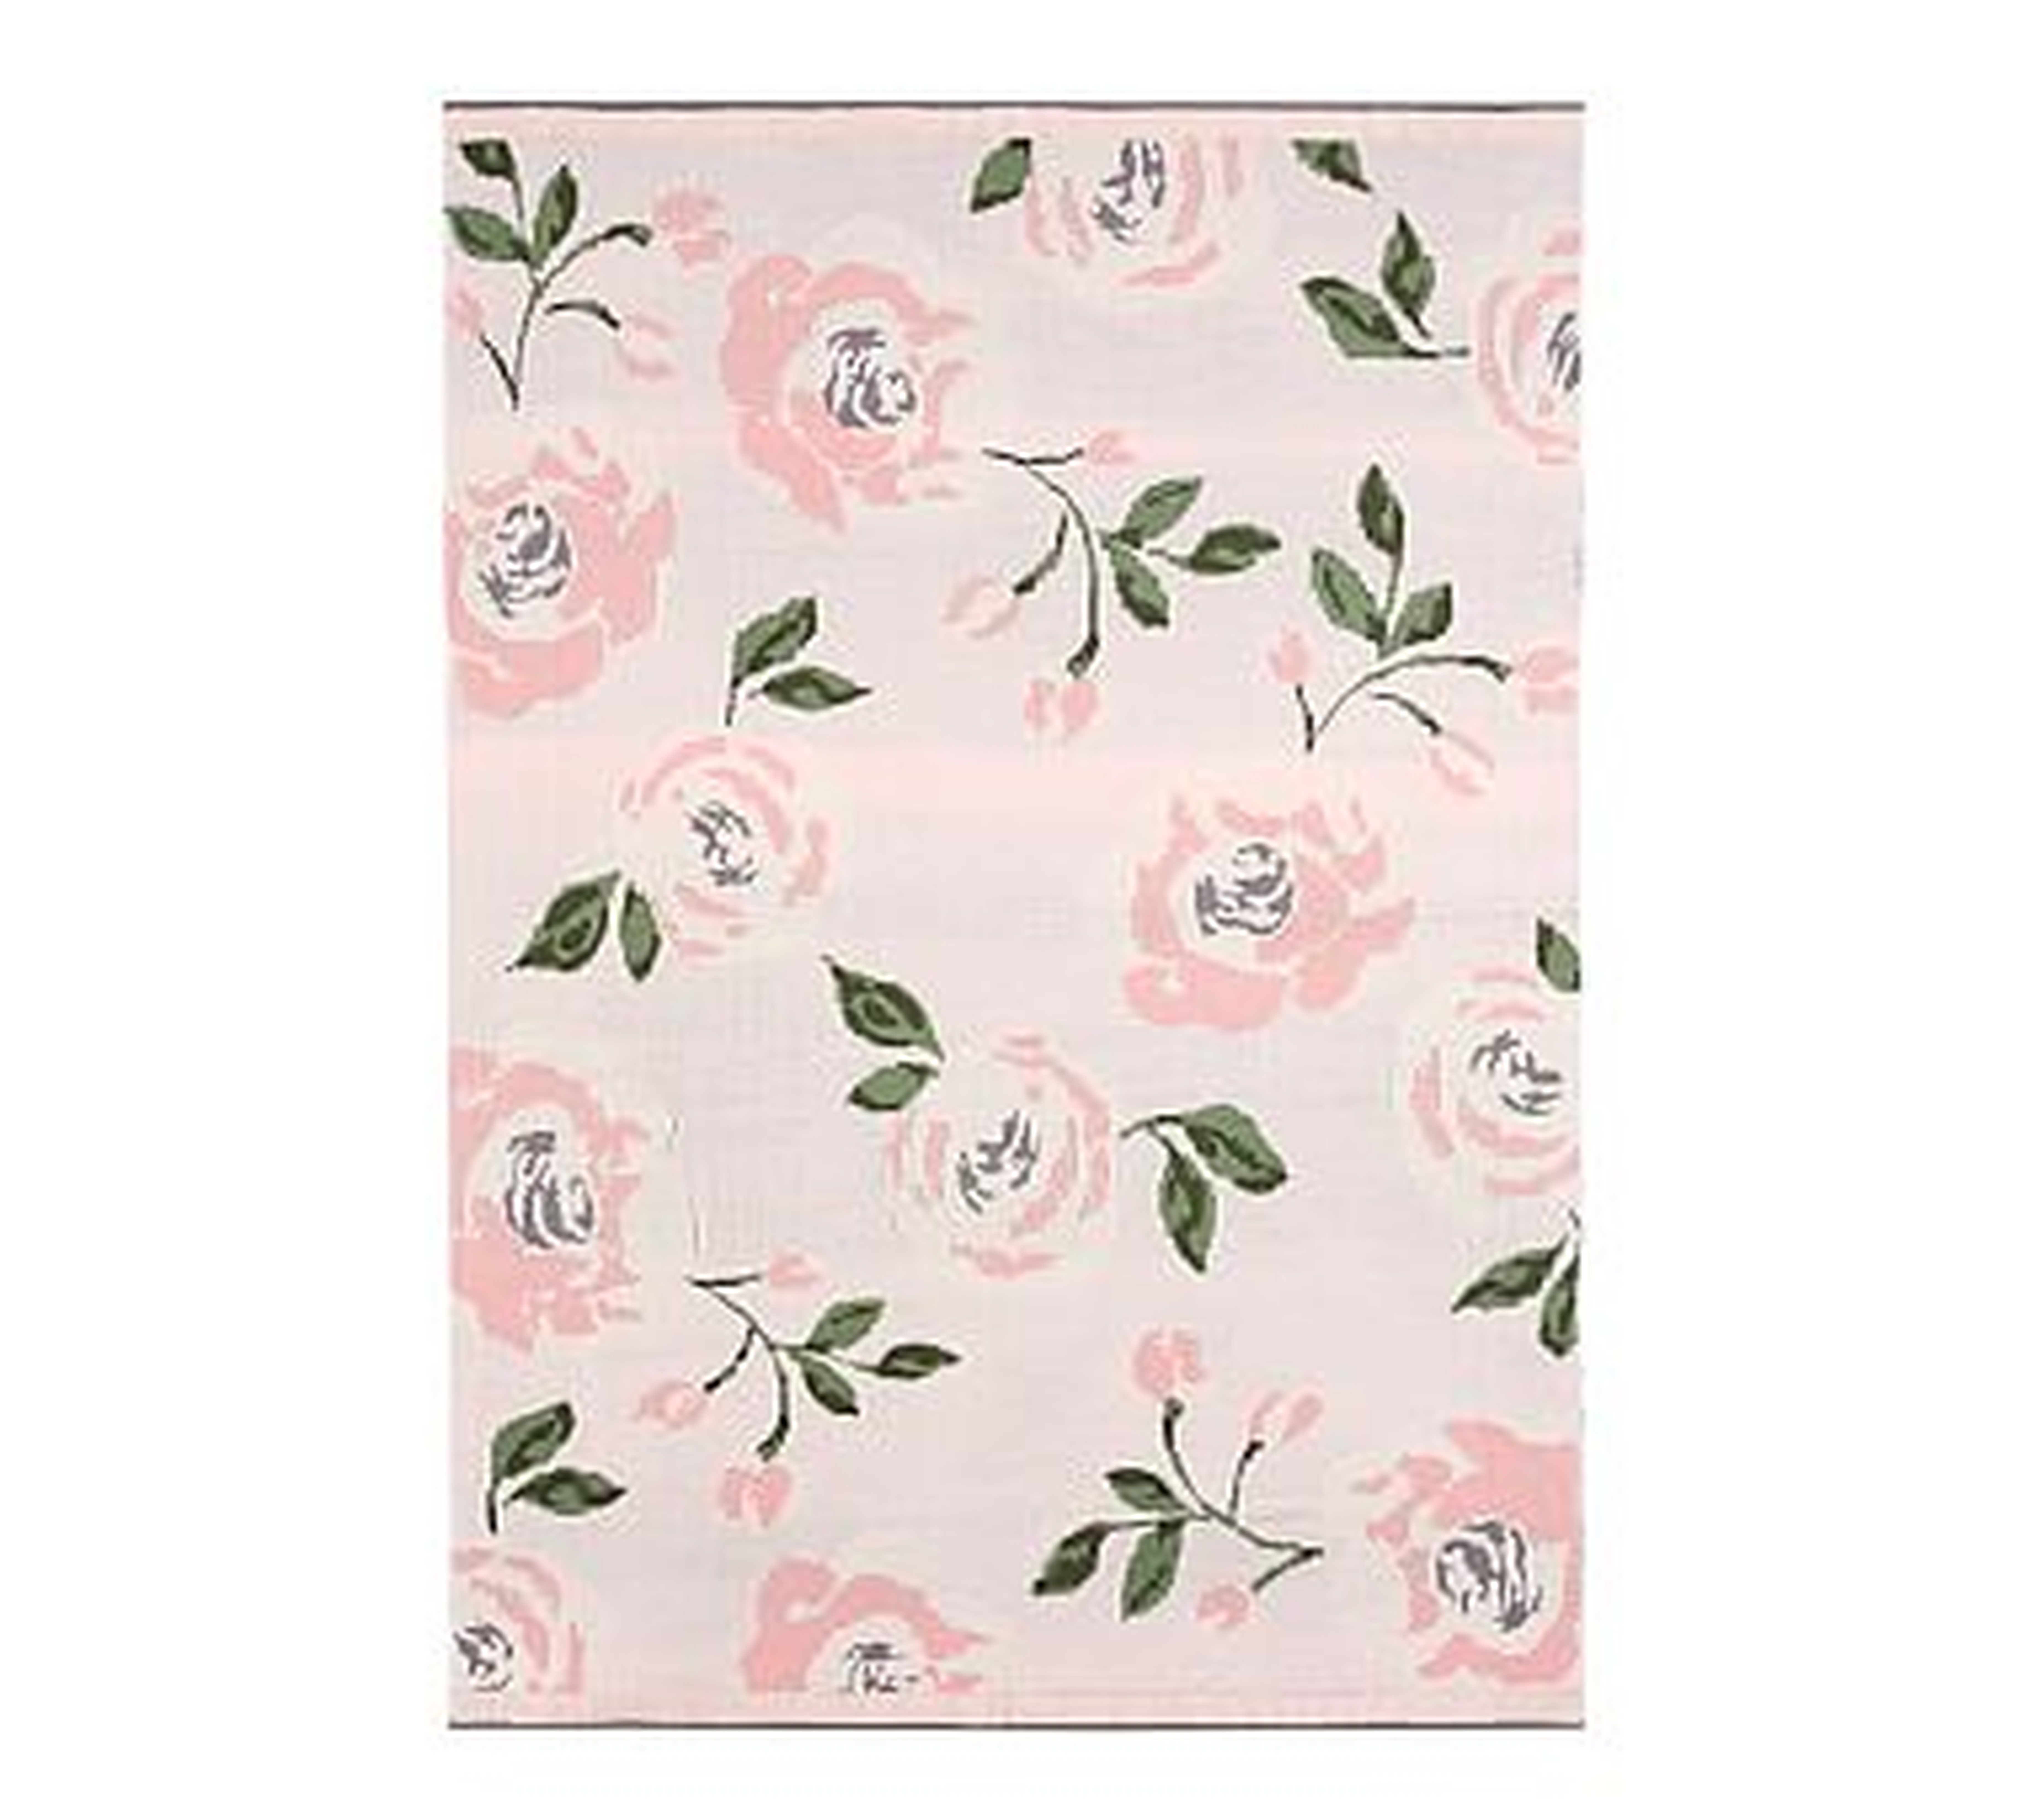 Meredith Knit Floral Baby Blanket, Blush - Pottery Barn Kids